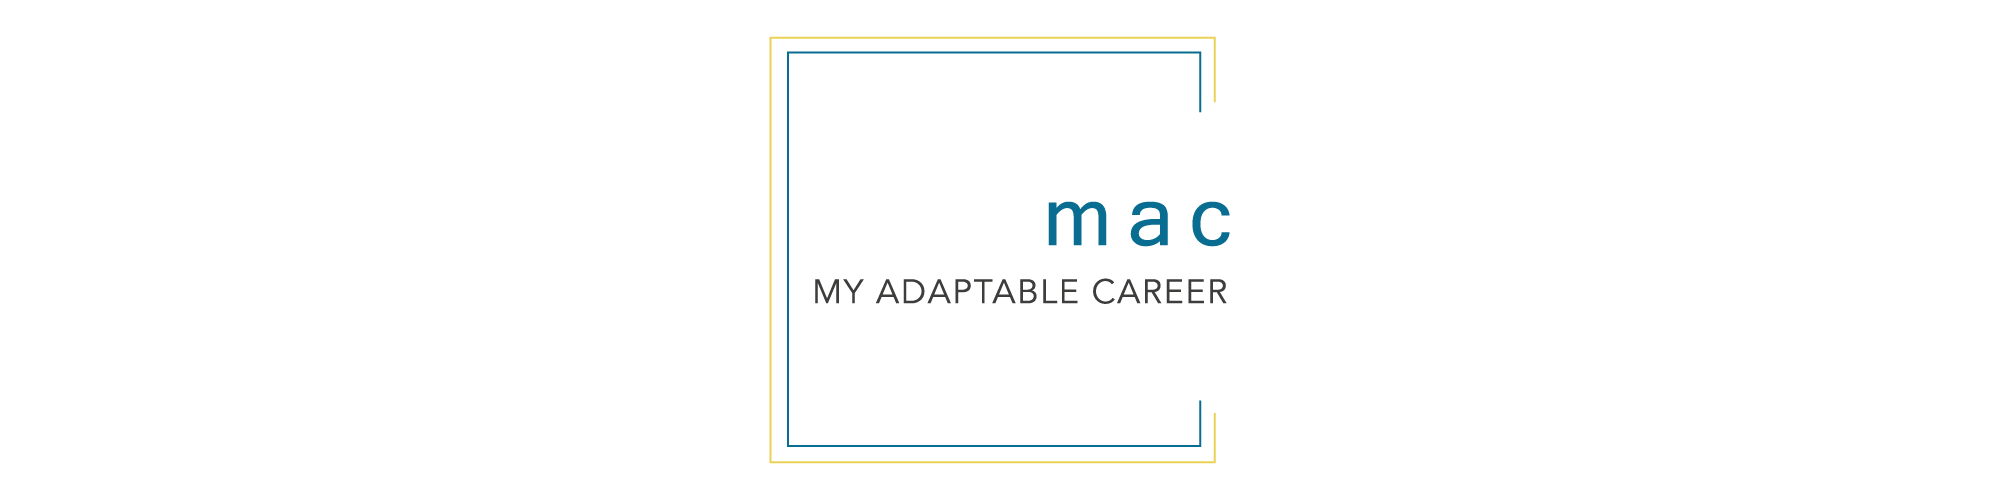 My Adaptable Career - Get More Done On Your Blog